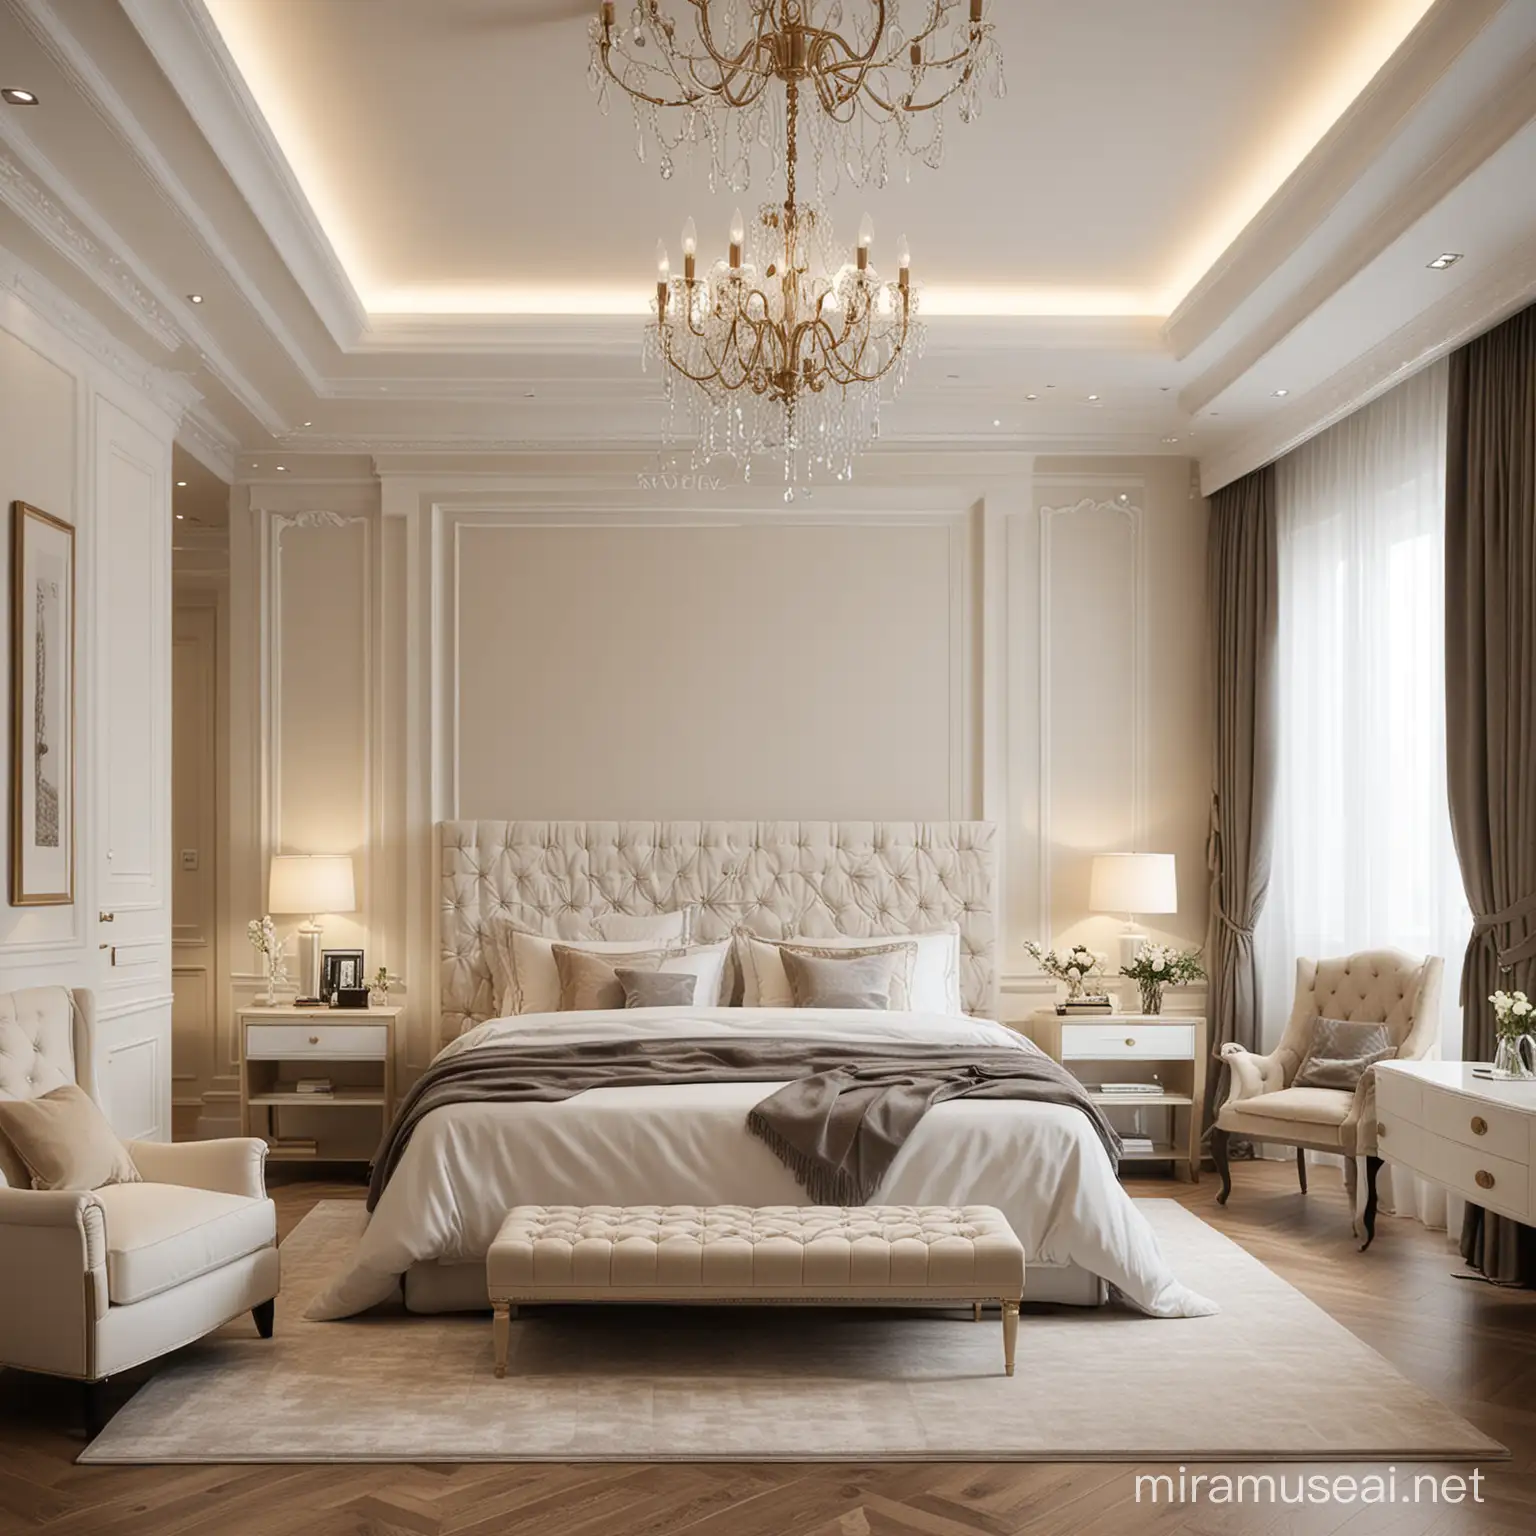 Elegant Modern Classical Master Bedroom Design for Young Couples